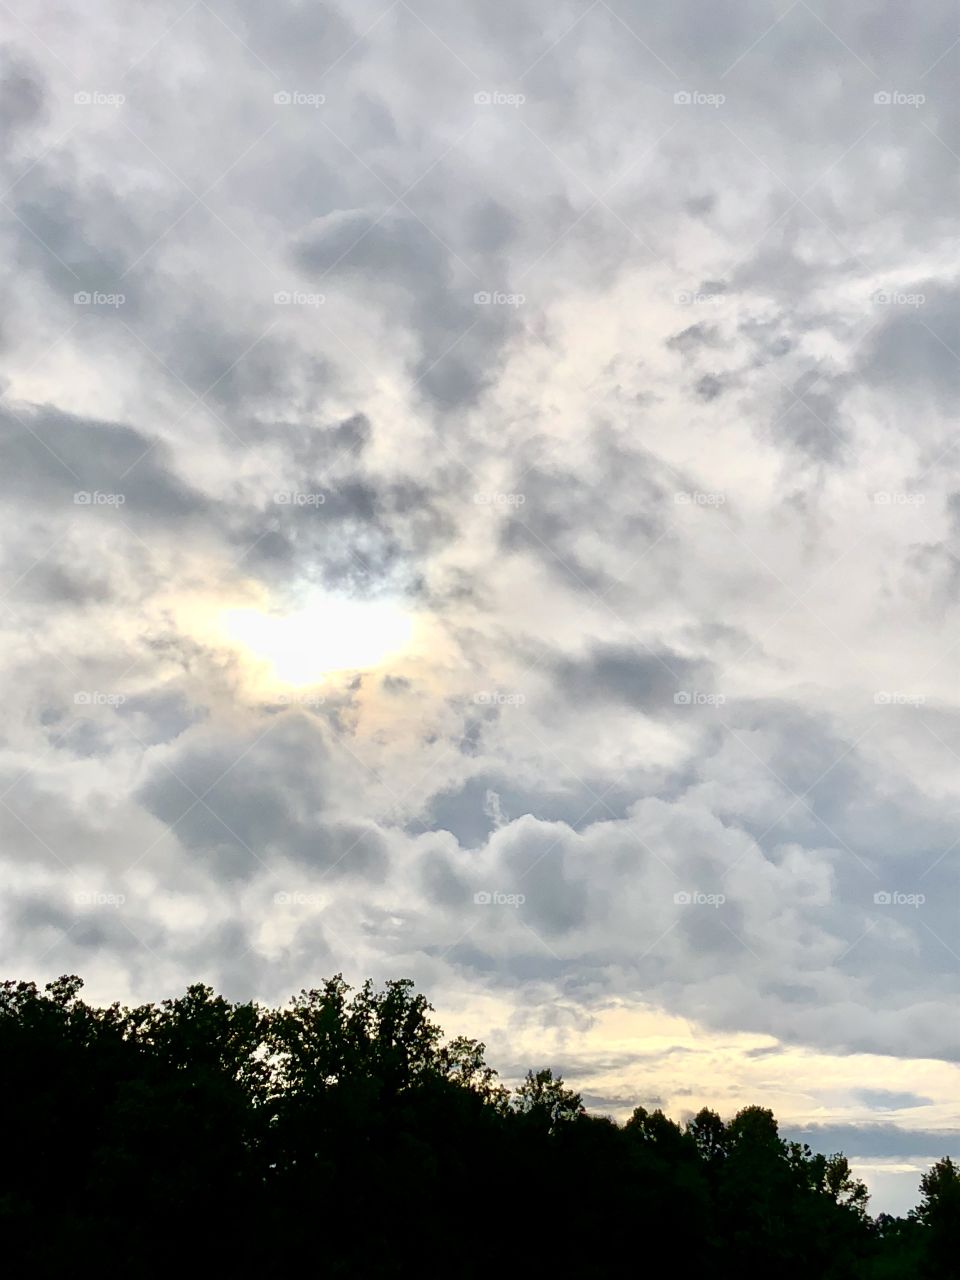 An eye of sun in the clouds